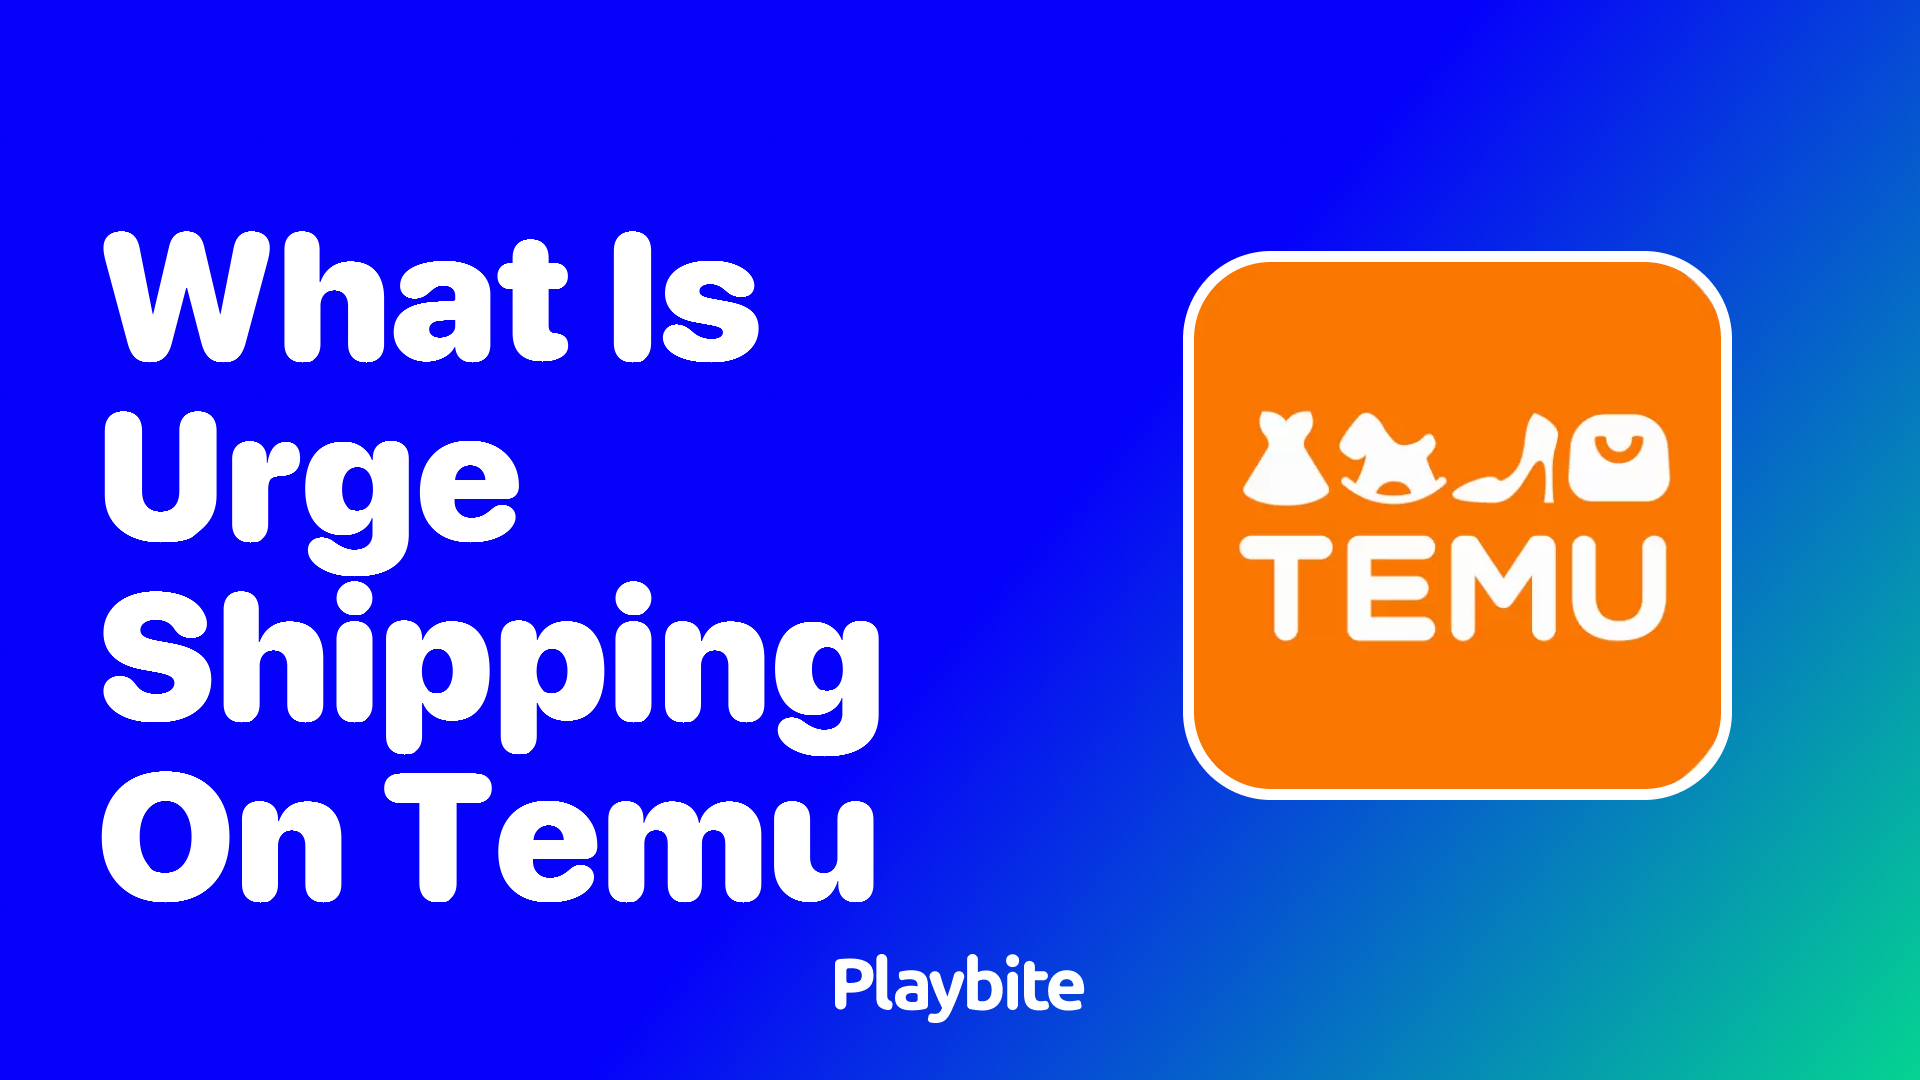 Does Temu Offer Expedited Shipping Options? - Playbite